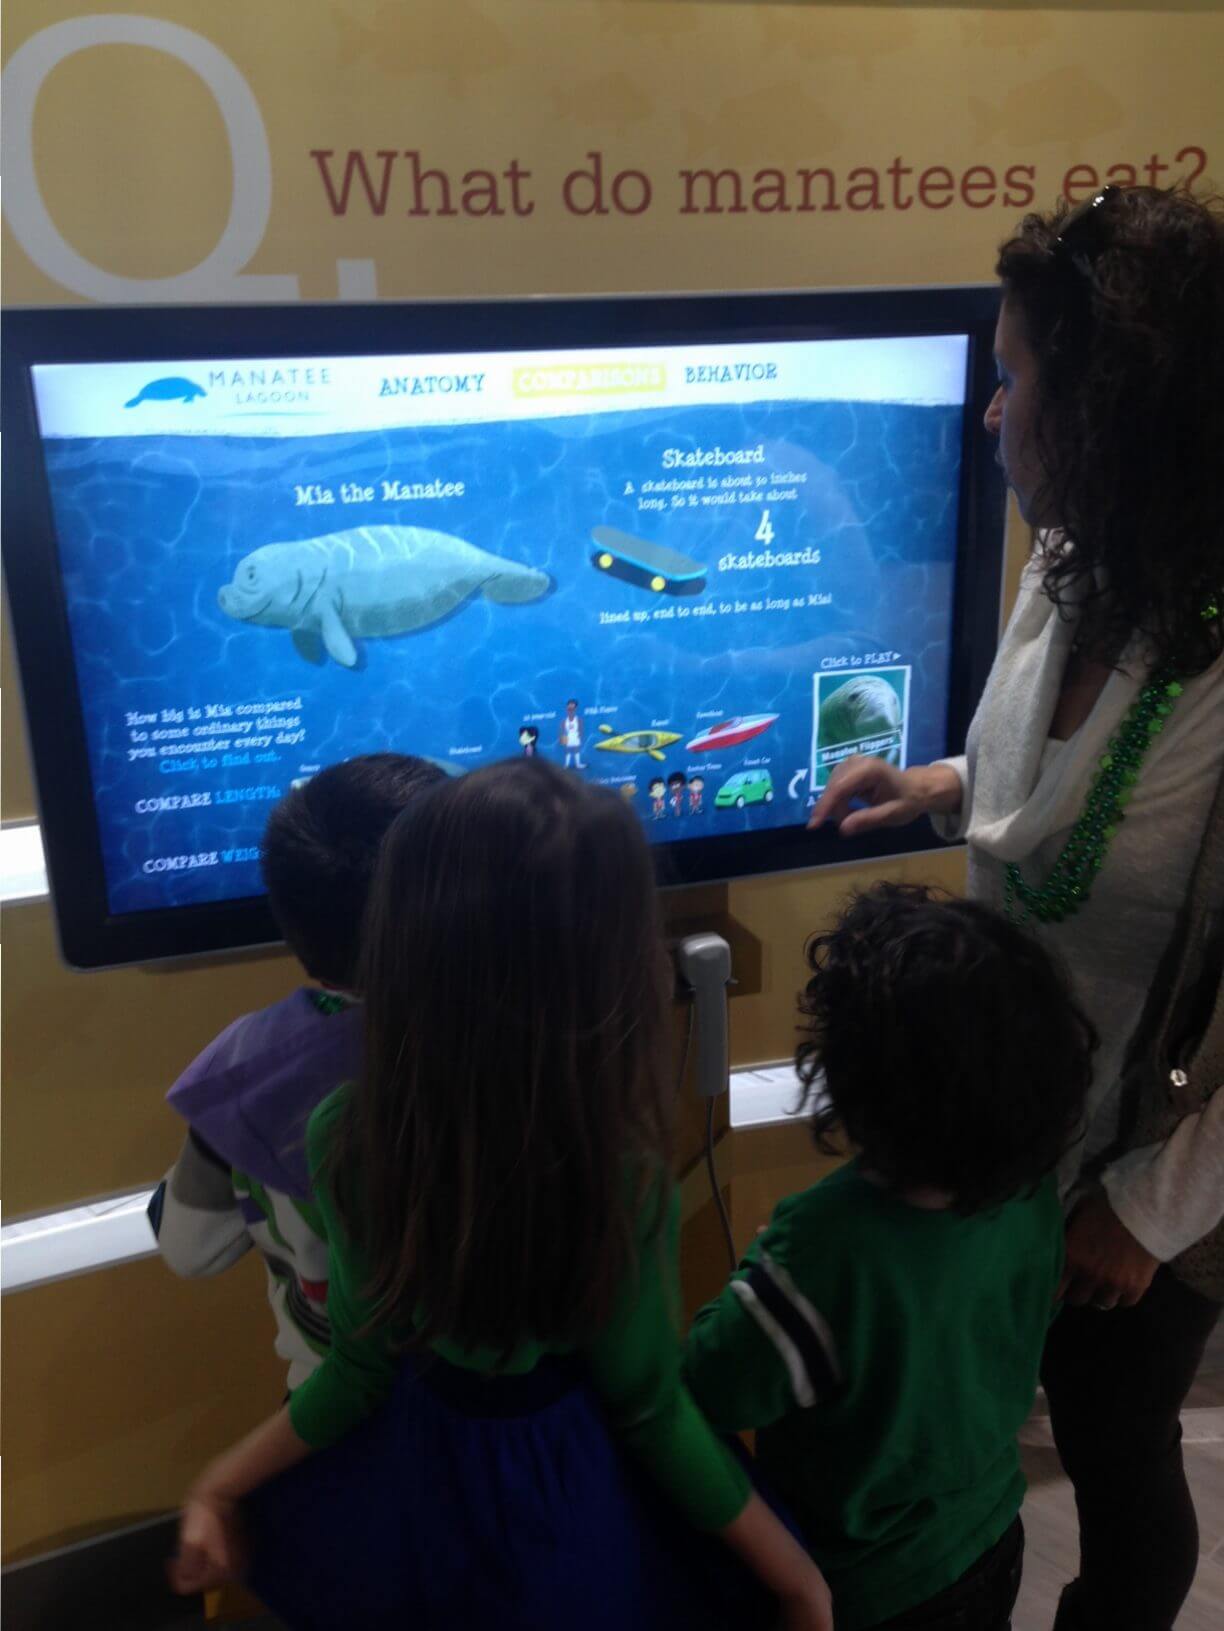 Inside exhibits at FPL's Manatee Lagoon in West Palm Beach.